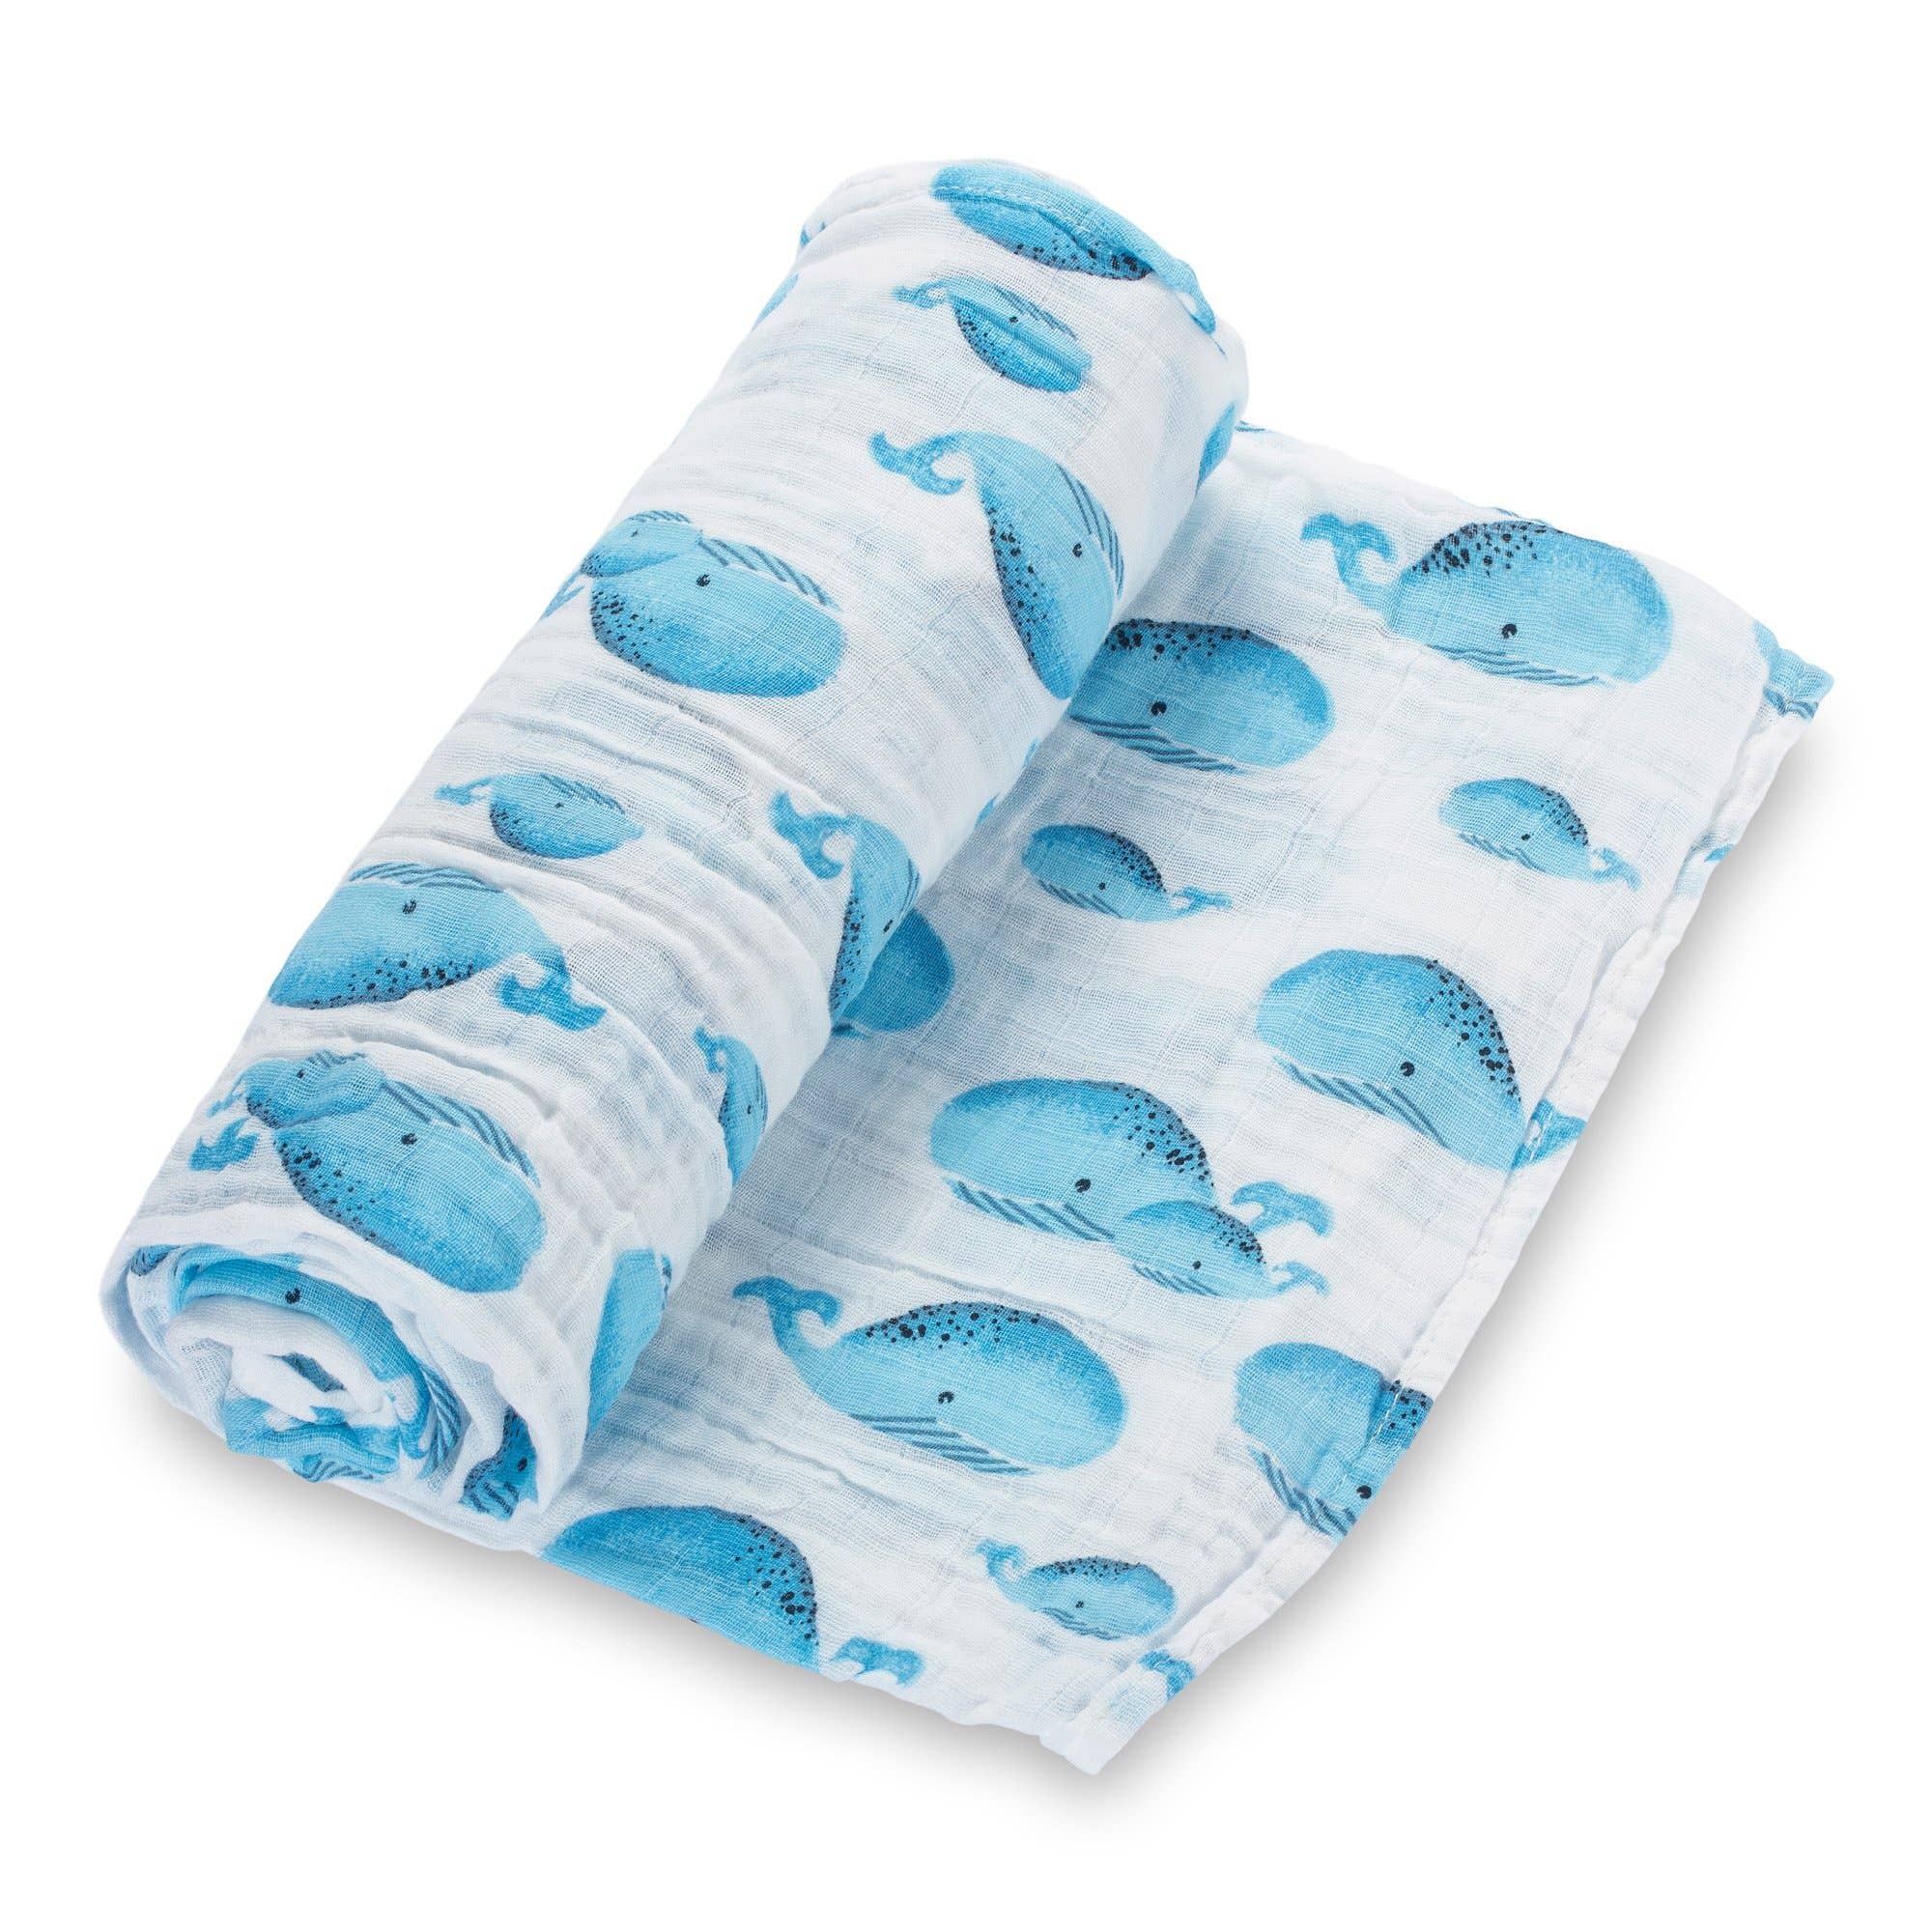 *Whale, Whale, Whale Baby Swaddle Blanket